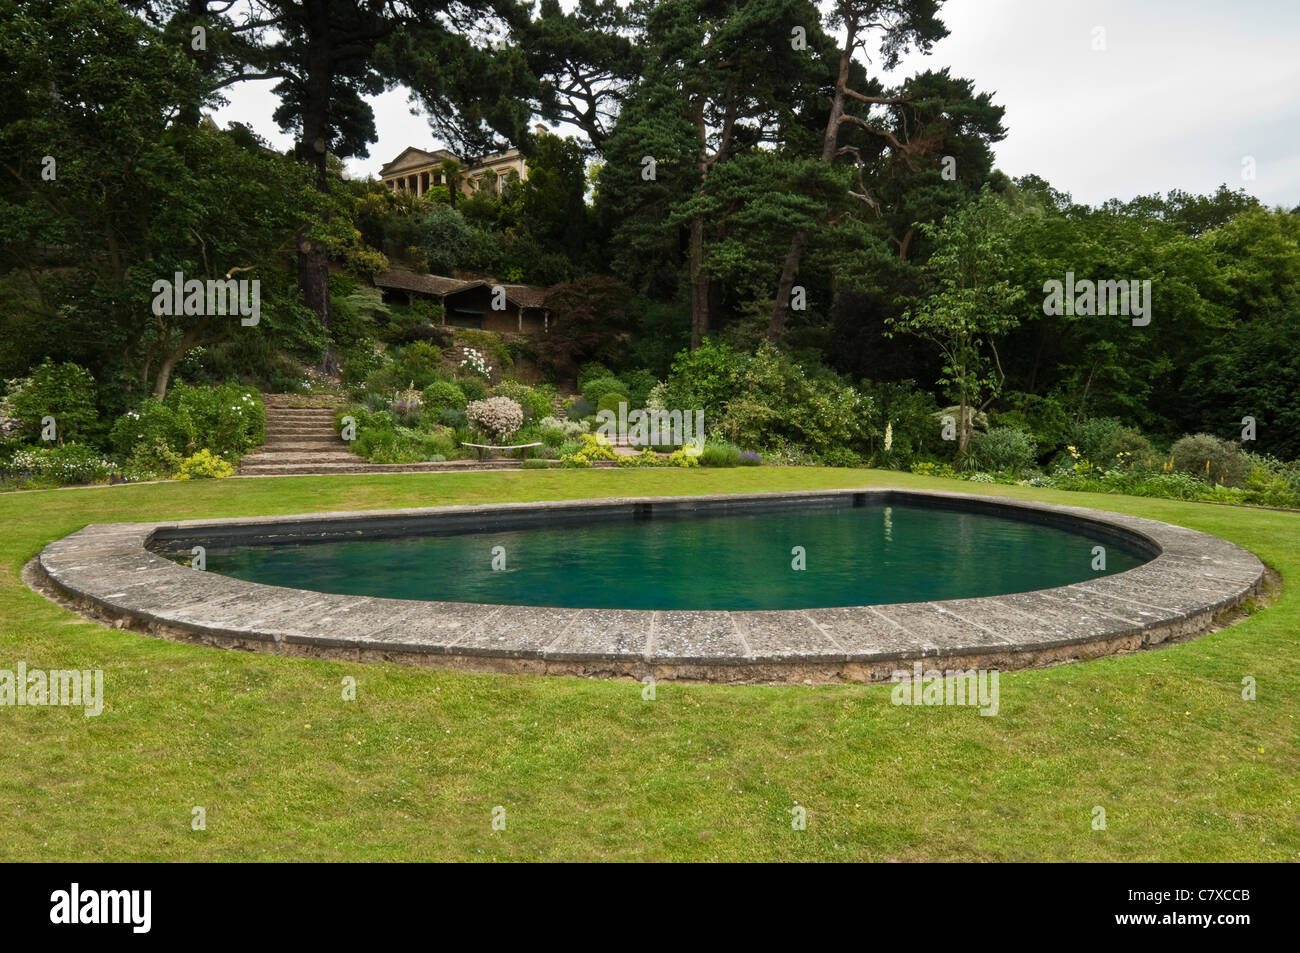 Semi-circular shaped swimming pool within Kiftsgate Court gardens near Chipping Campden, Cotswolds, Gloucestershire, England Stock Photo